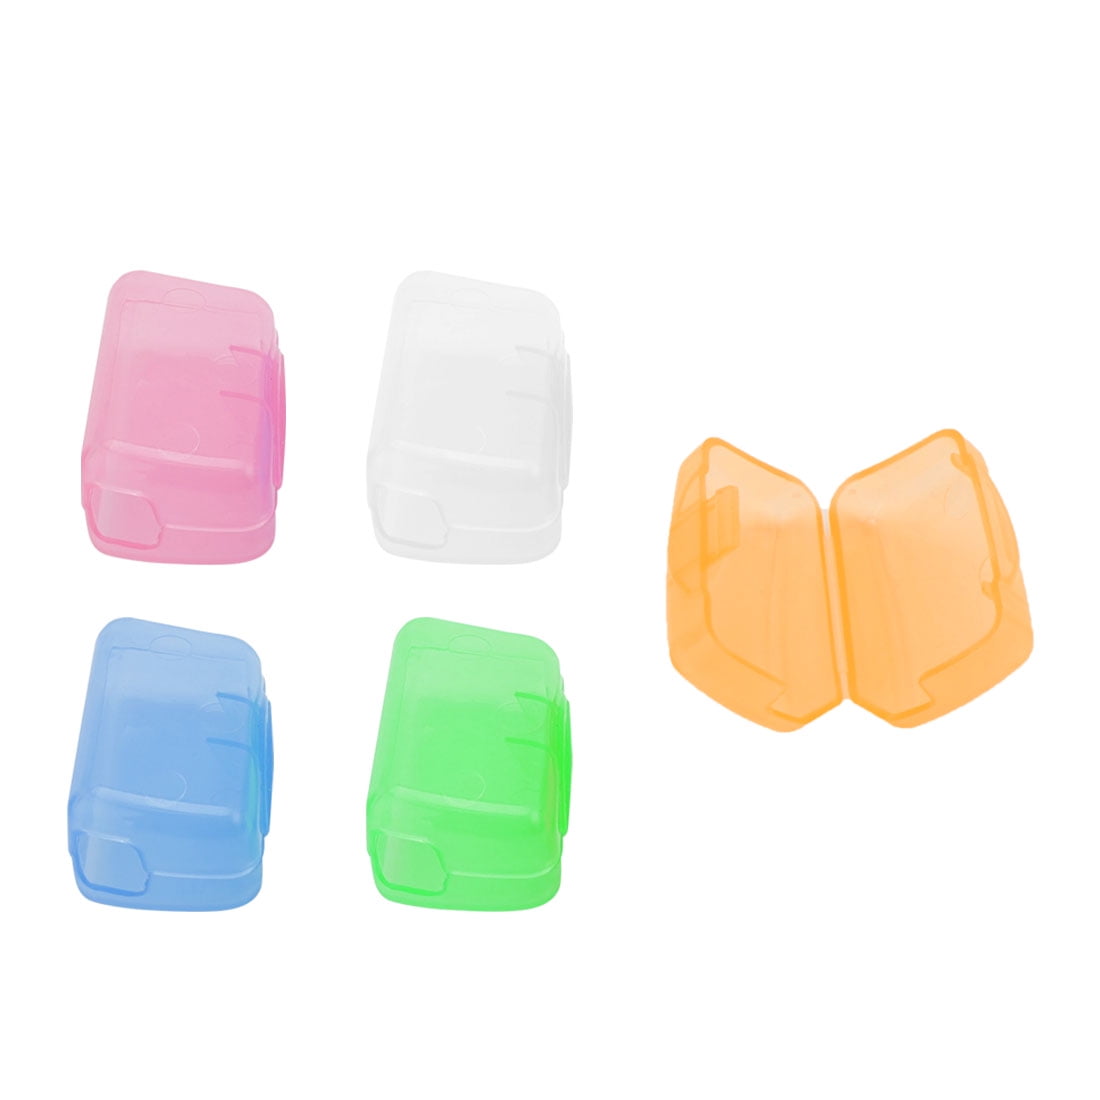 Details about   5 pcs Toothbrush Head Cover Holder Travel Camping Case Protect Brush Caps Case 